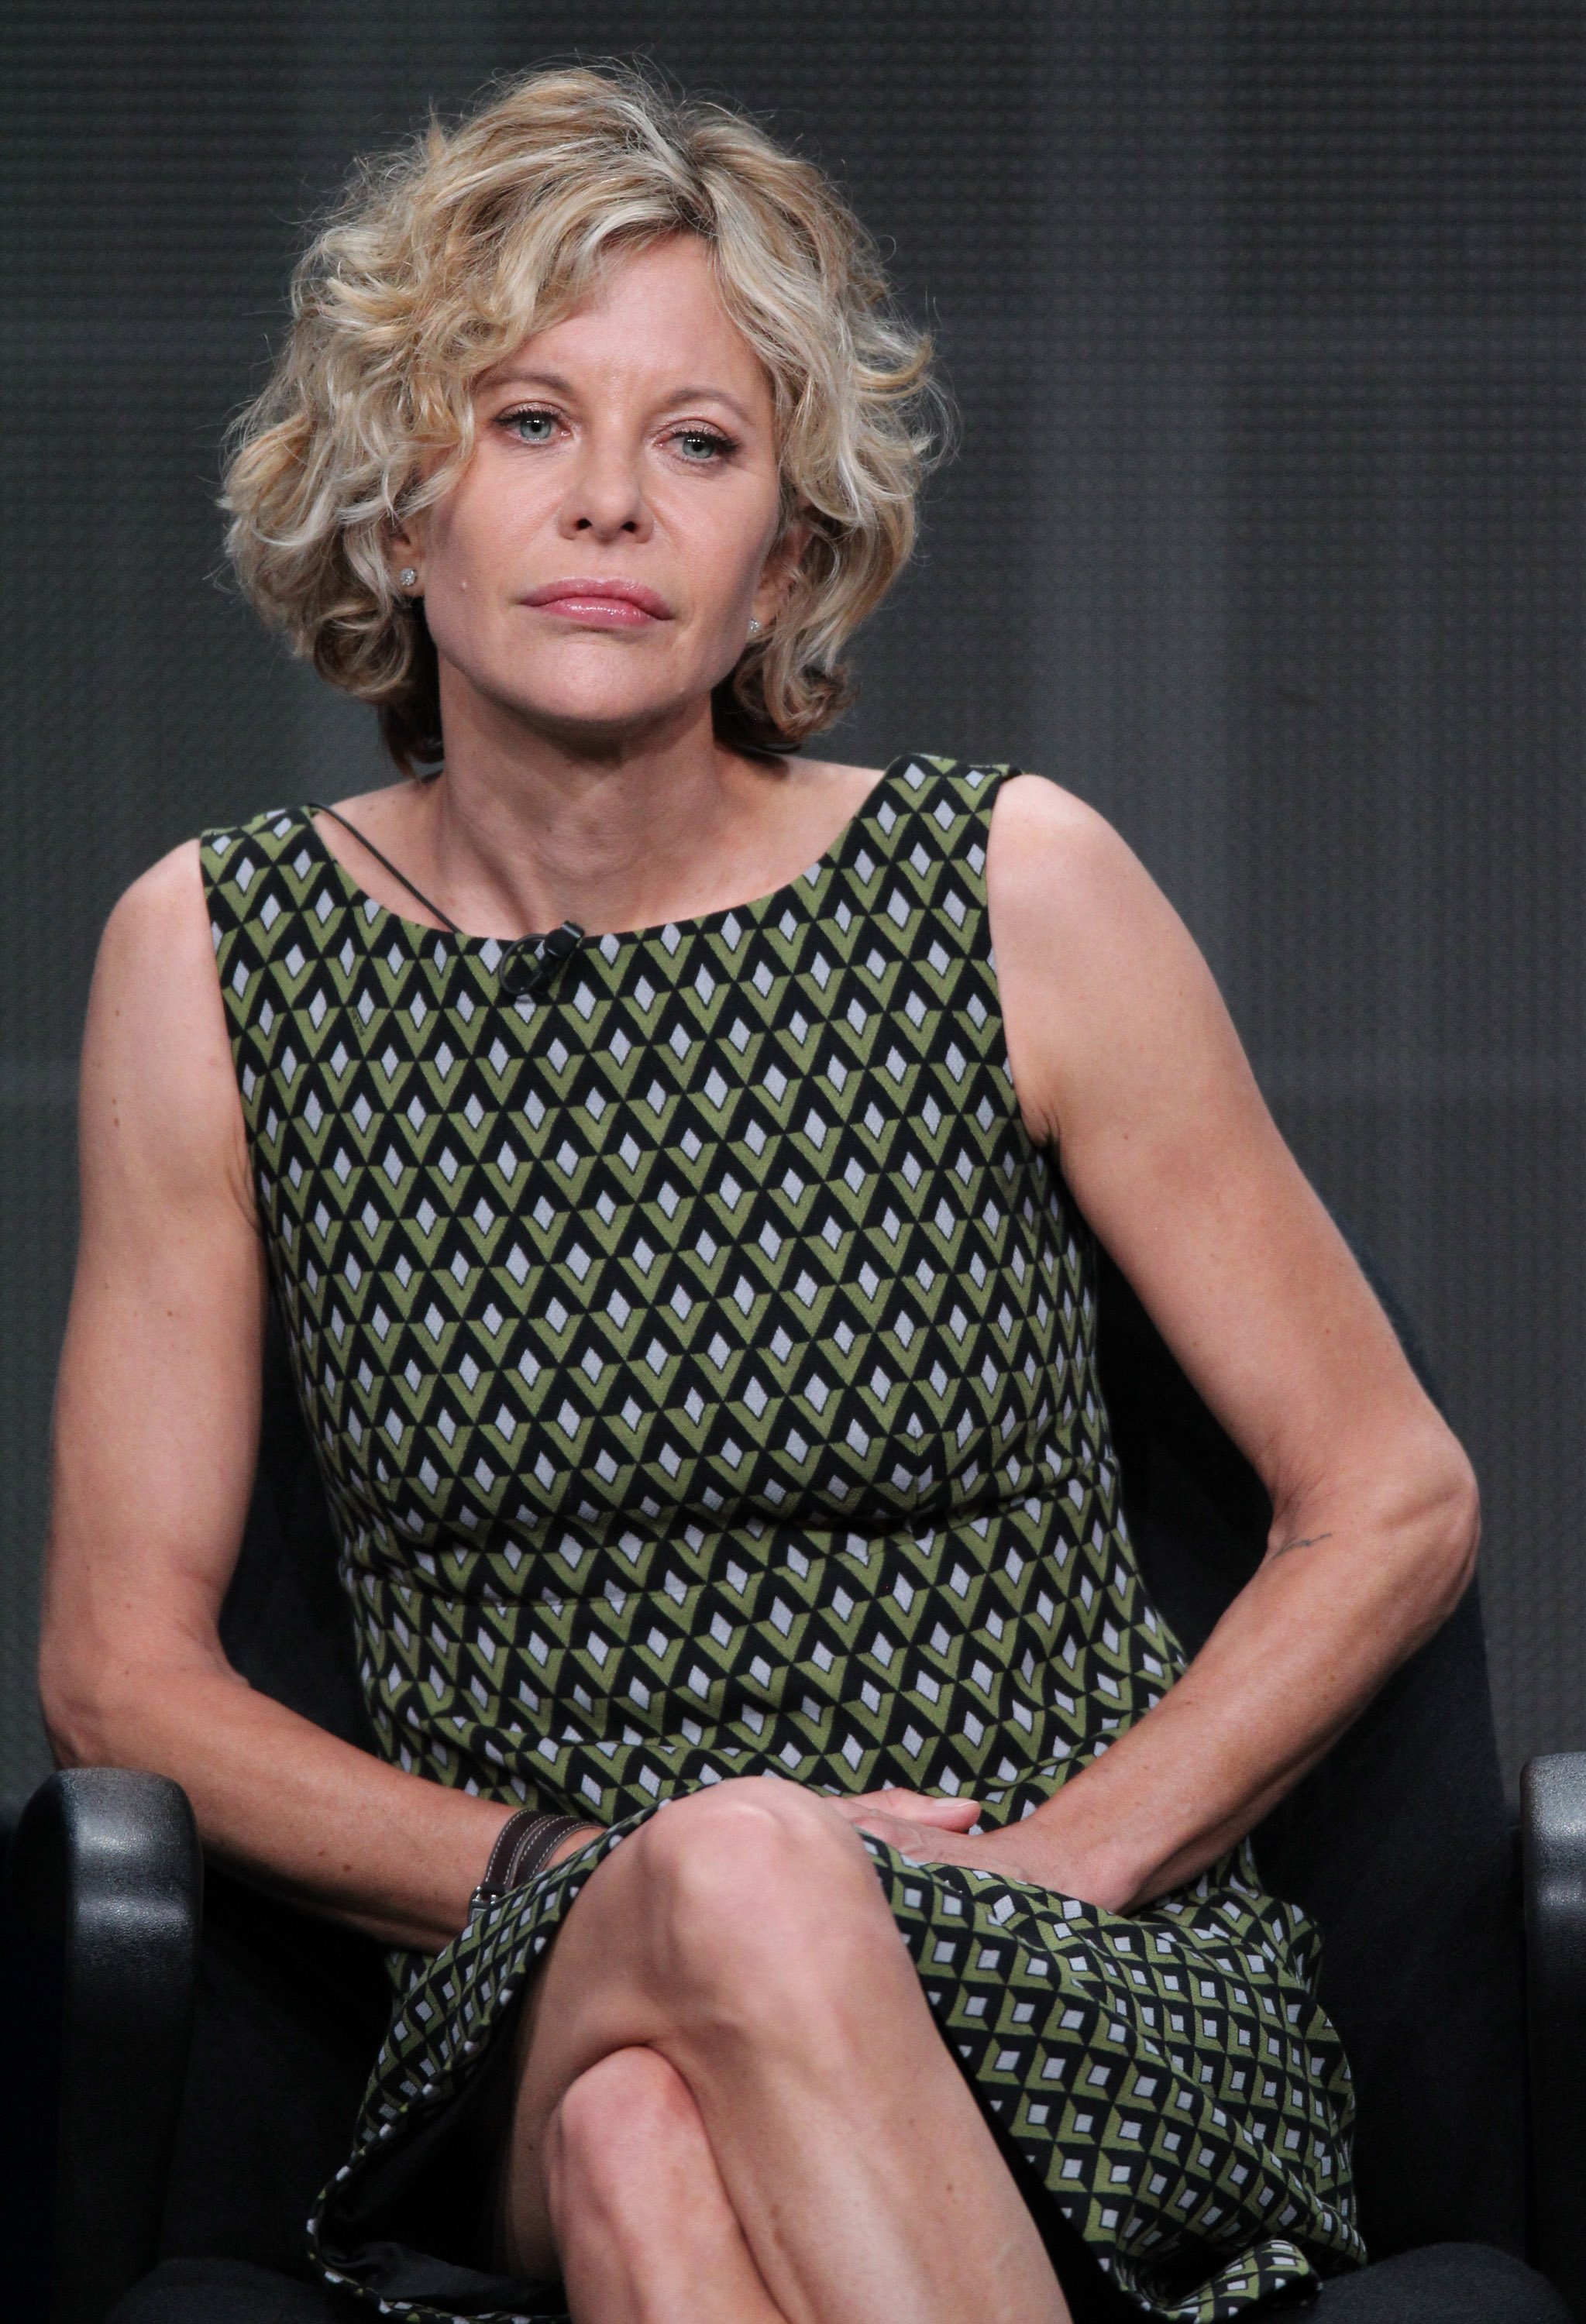 Meg Ryan speaks onstage at the "Half the Sky, a Special Presentation of Independent Lens" panel during day 2 of the PBS portion of the 2012 Summer TCA Tour at the Beverly Hilton Hotel on July 22, 2012 in Los Angeles, California | Source: Getty Images